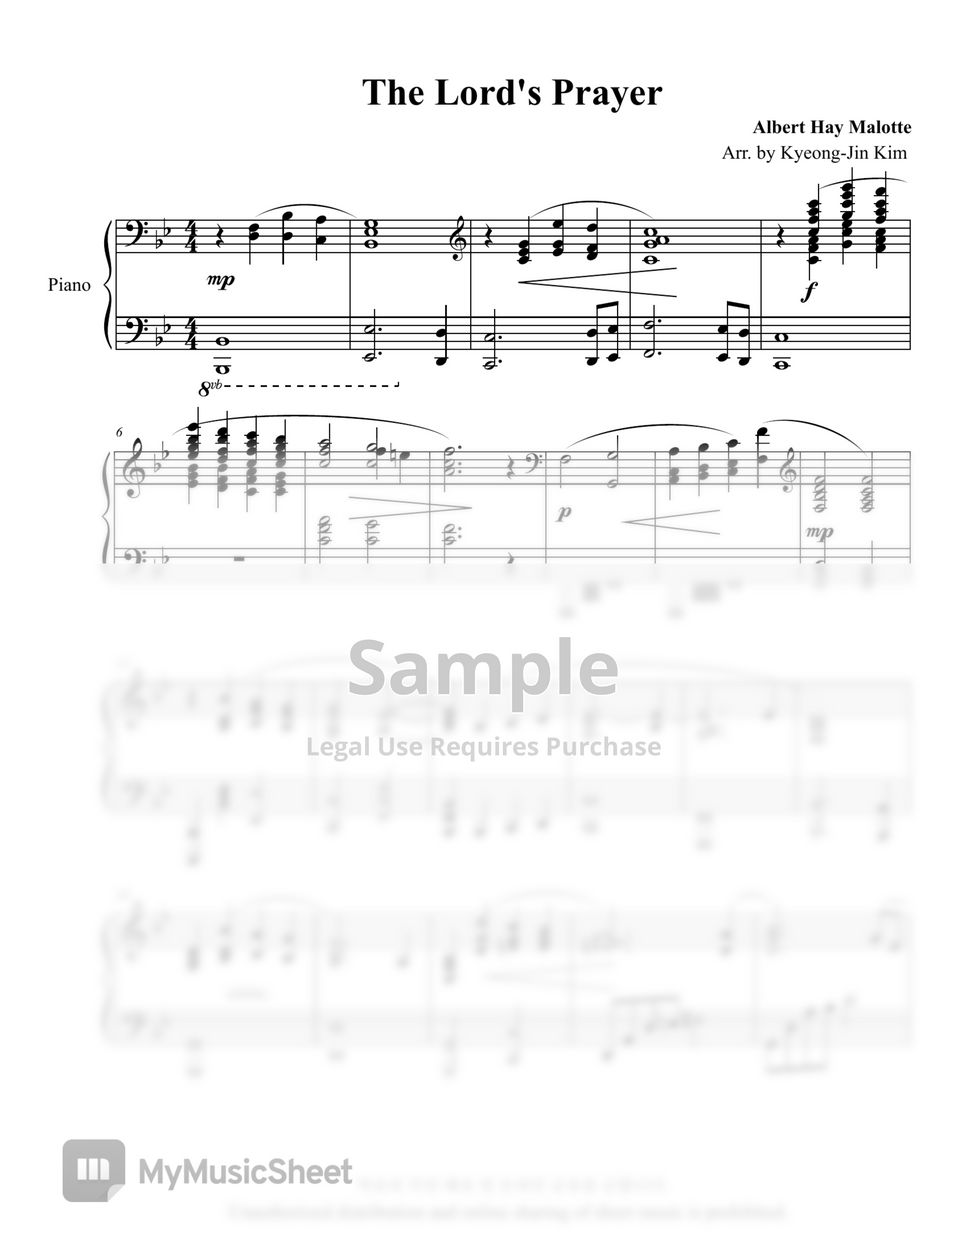 A.H.Malotte - The Lord's prayer(주기도문) by Pianist Jin